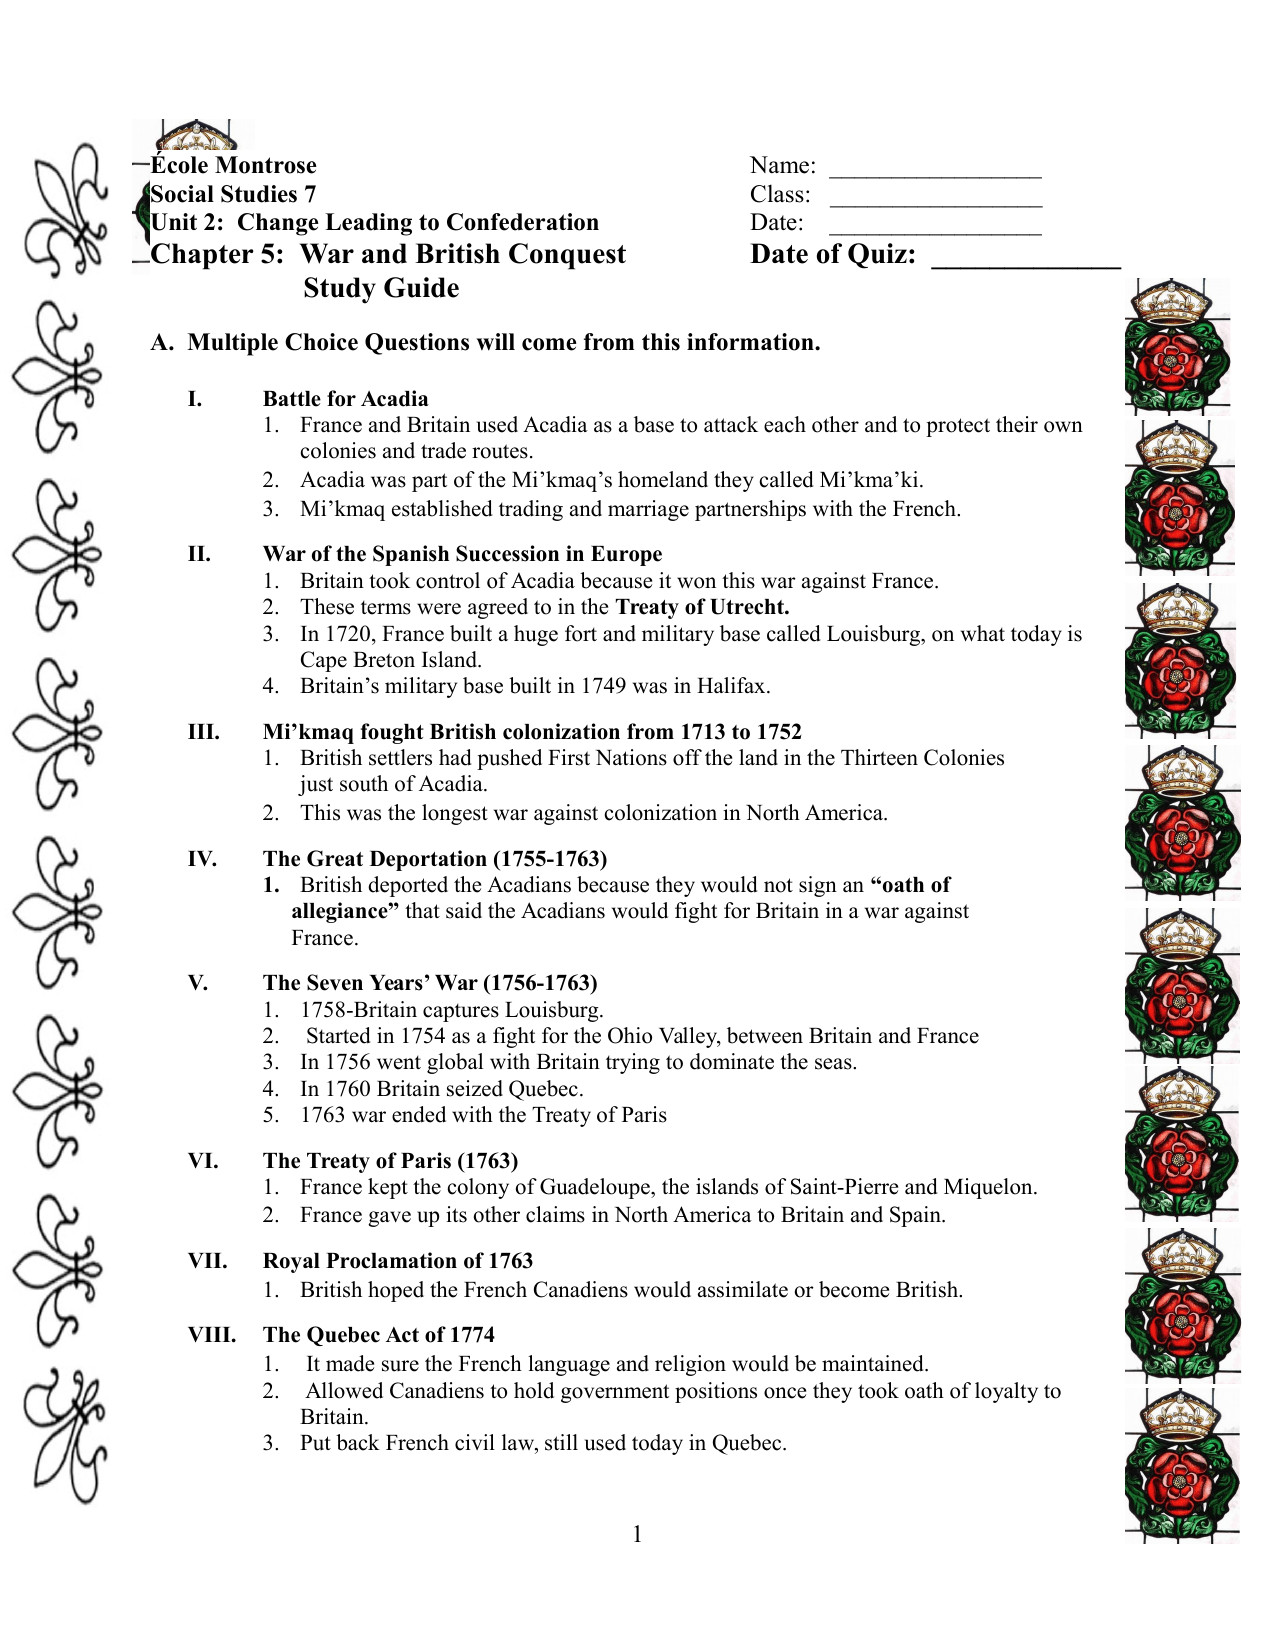 Free Math Worksheets Second Grade 2 Counting Money Counting Money Canadian Nickels Dimes Quarters Loonies toonies